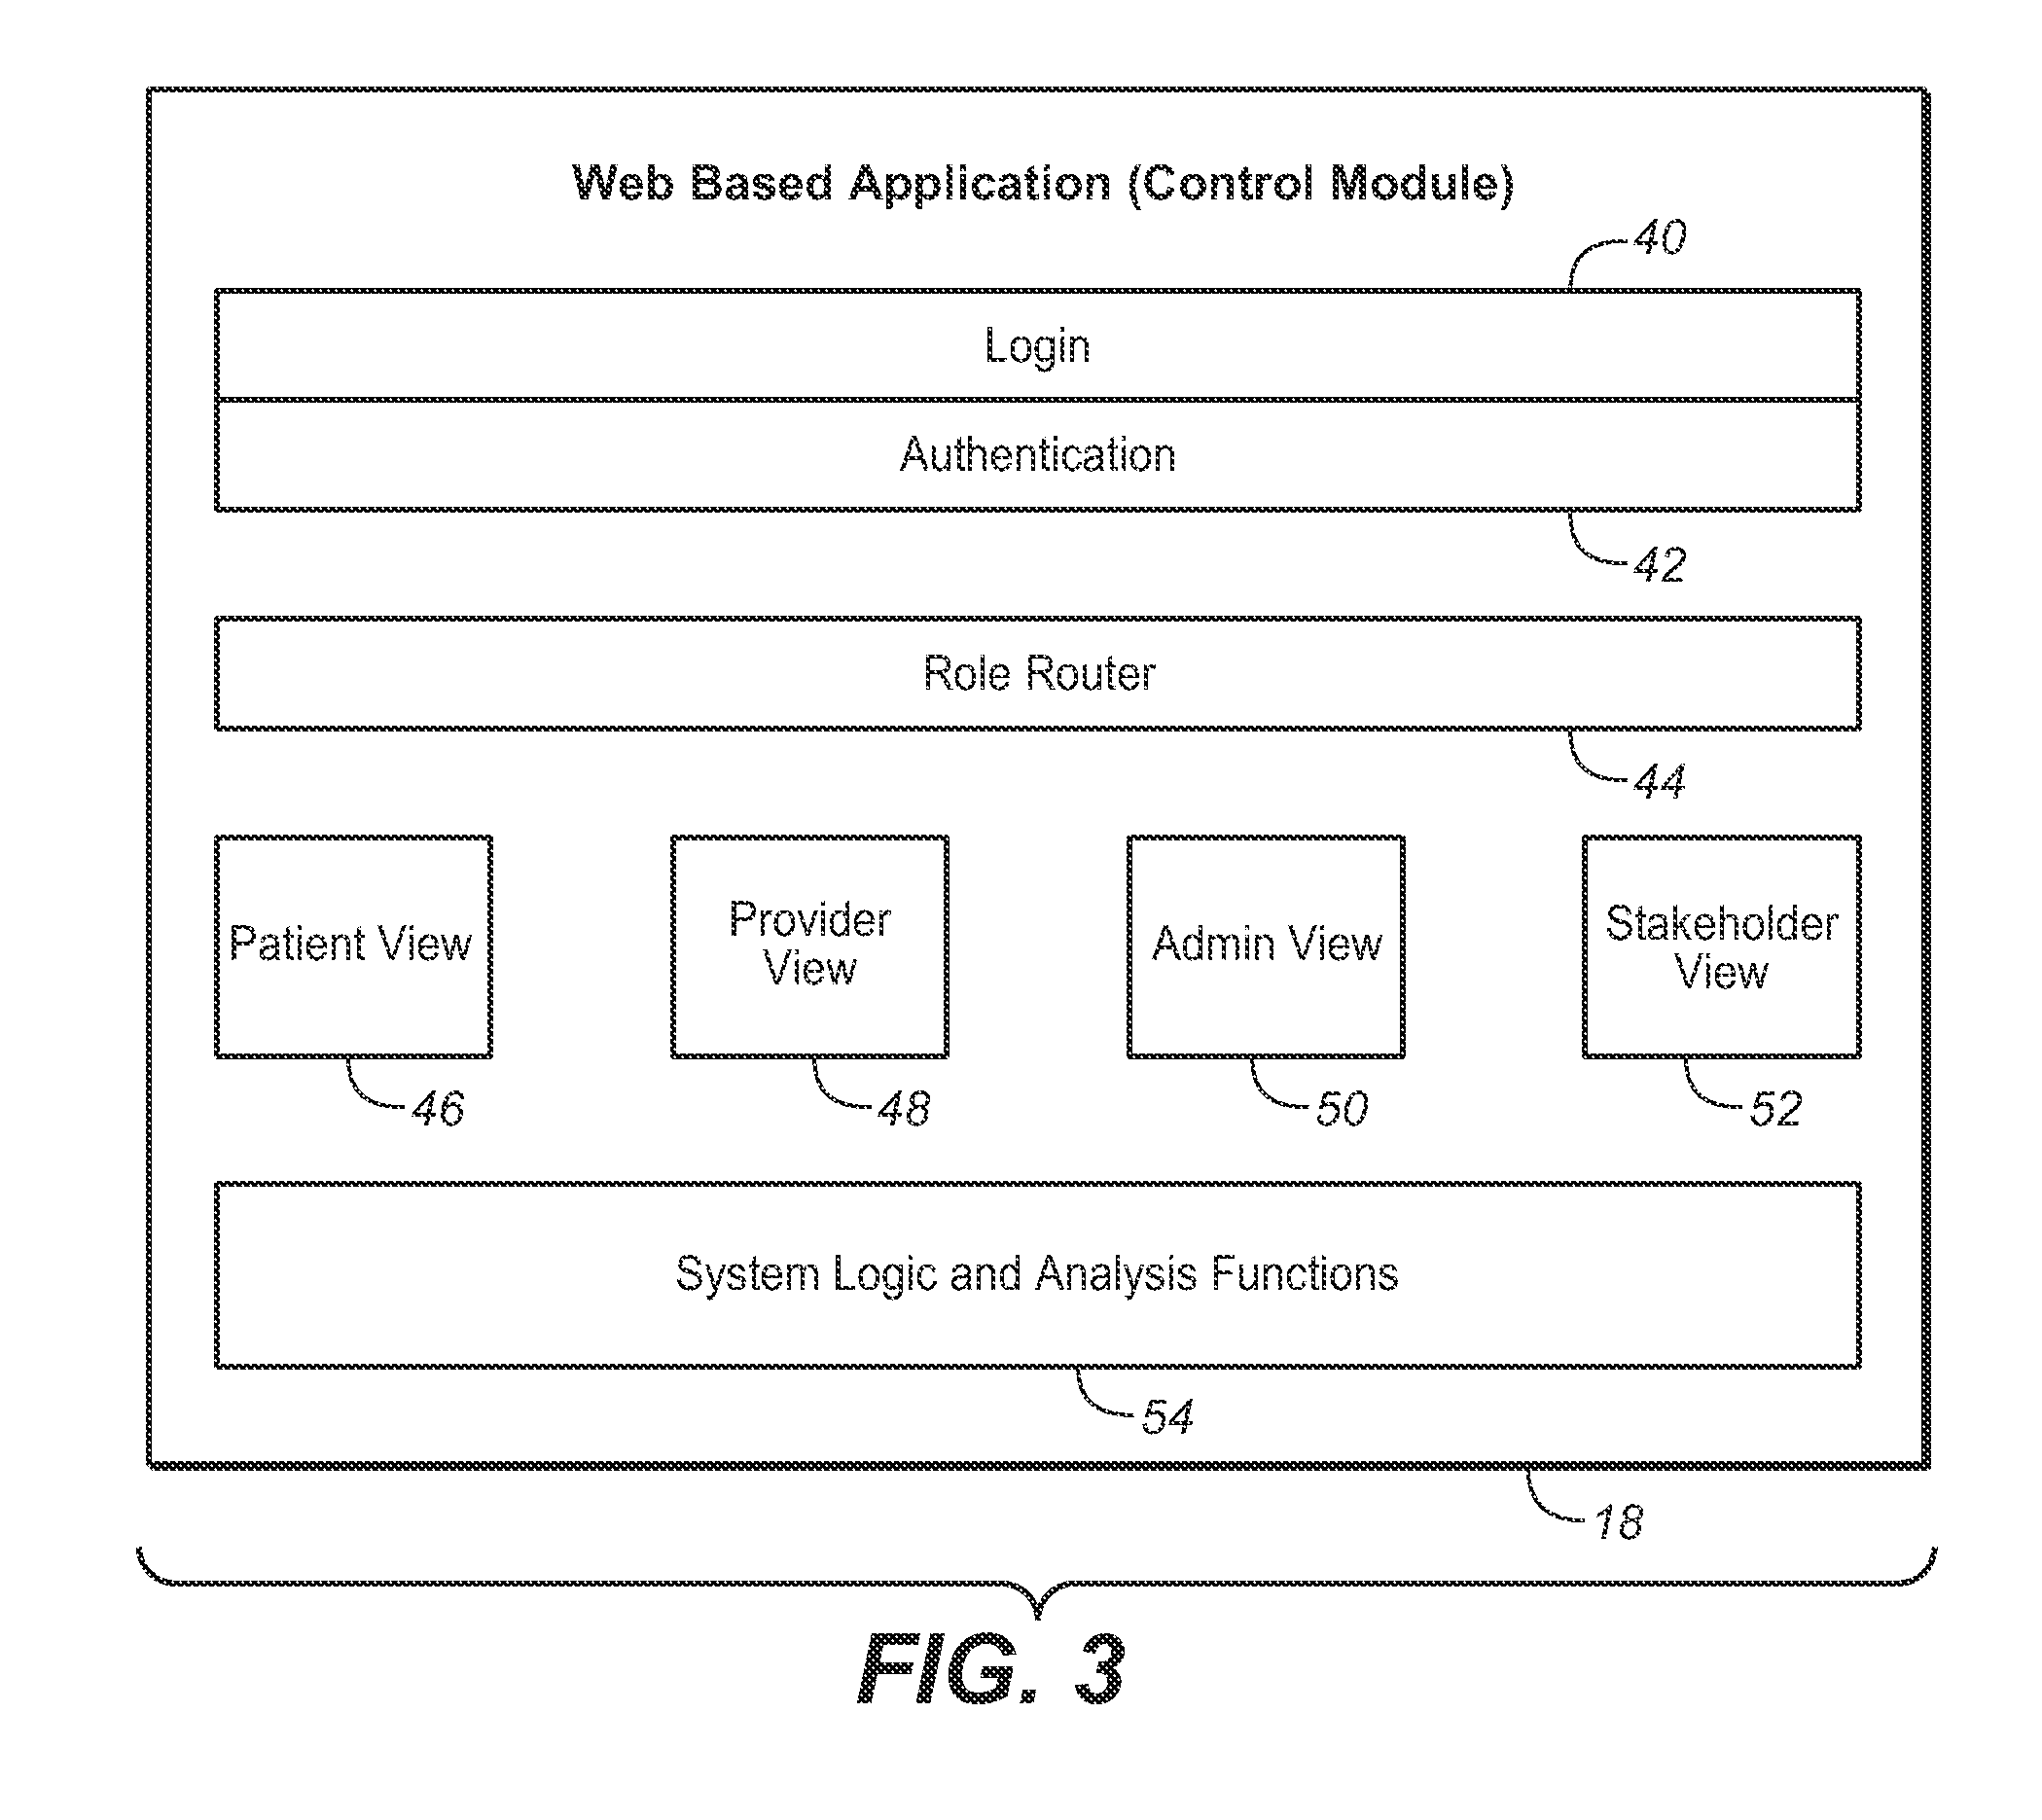 System for monitoring of and managing compliance with treatment for obstructive sleep apnea using oral appliance therapy and method therfor